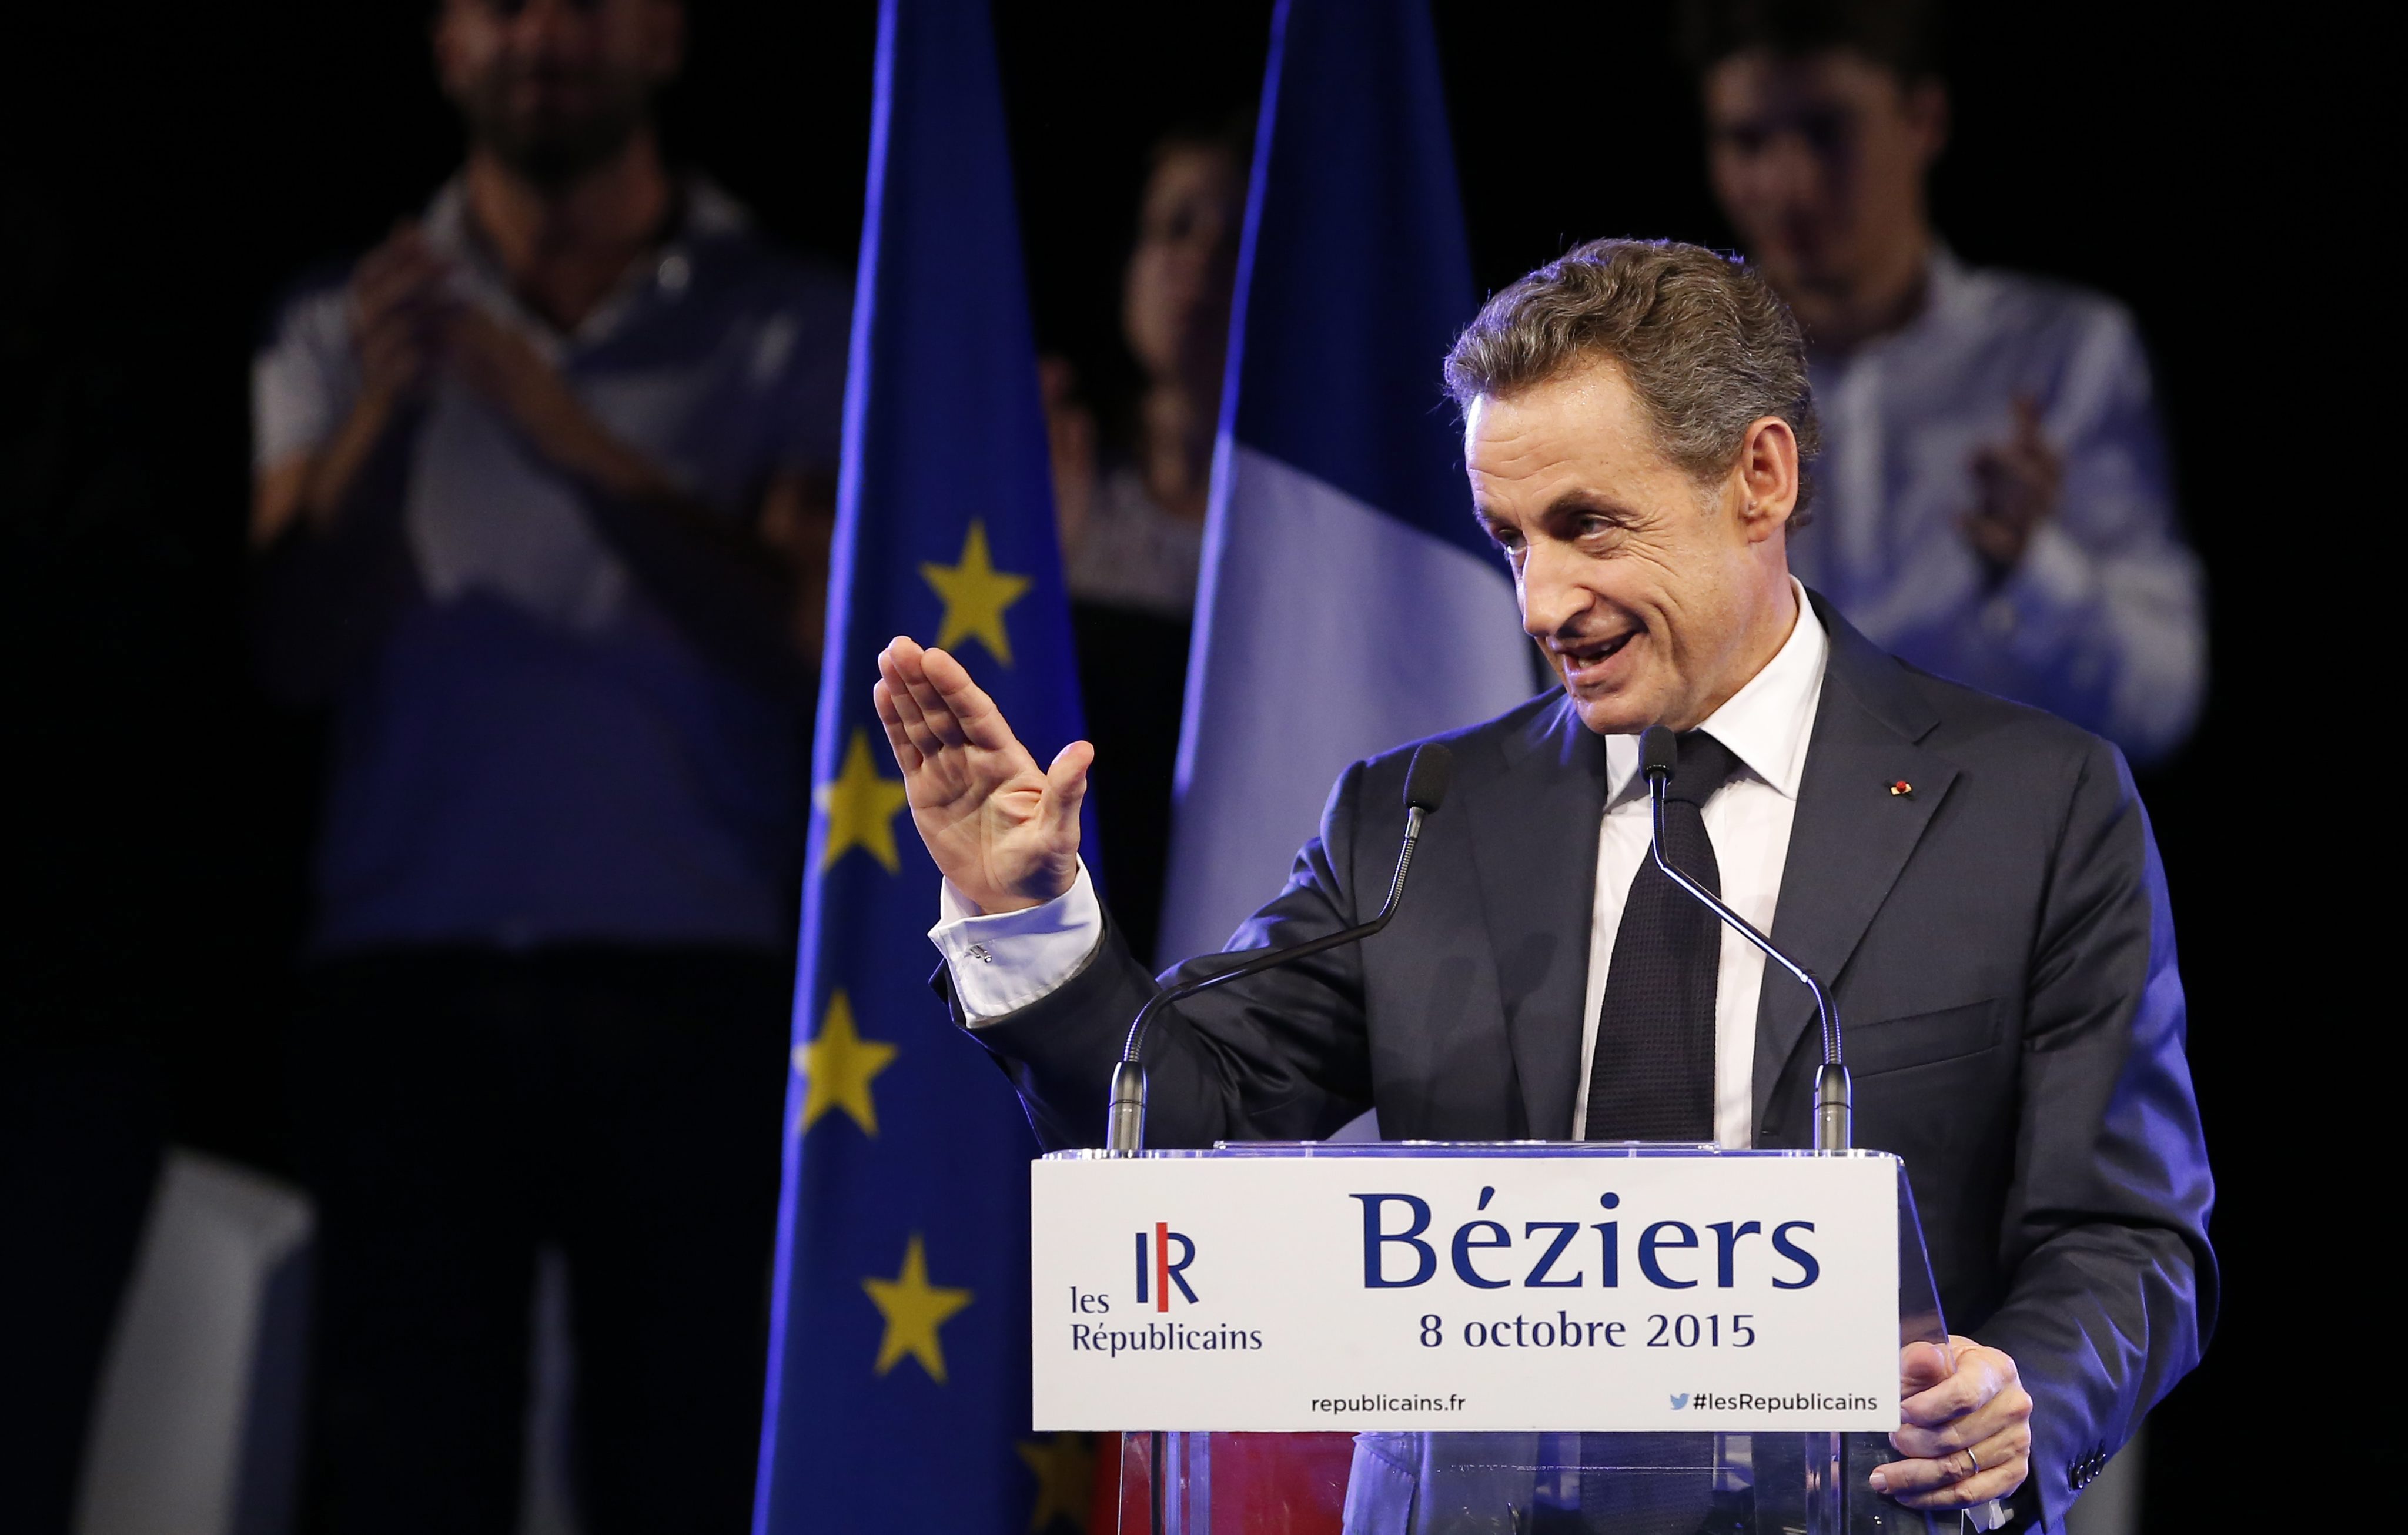 epa04969345 Nicolas Sarkozy (C), President of Les Republicains party, delivers a speech during a political rally in Beziers, Southern France, 08 October 2015. Nicolas Sarkozy is in Beziers campaigning for the French regional elections which will take place on 06 and 13 December 2015. EPA/GUILLAUME HORCAJUELO